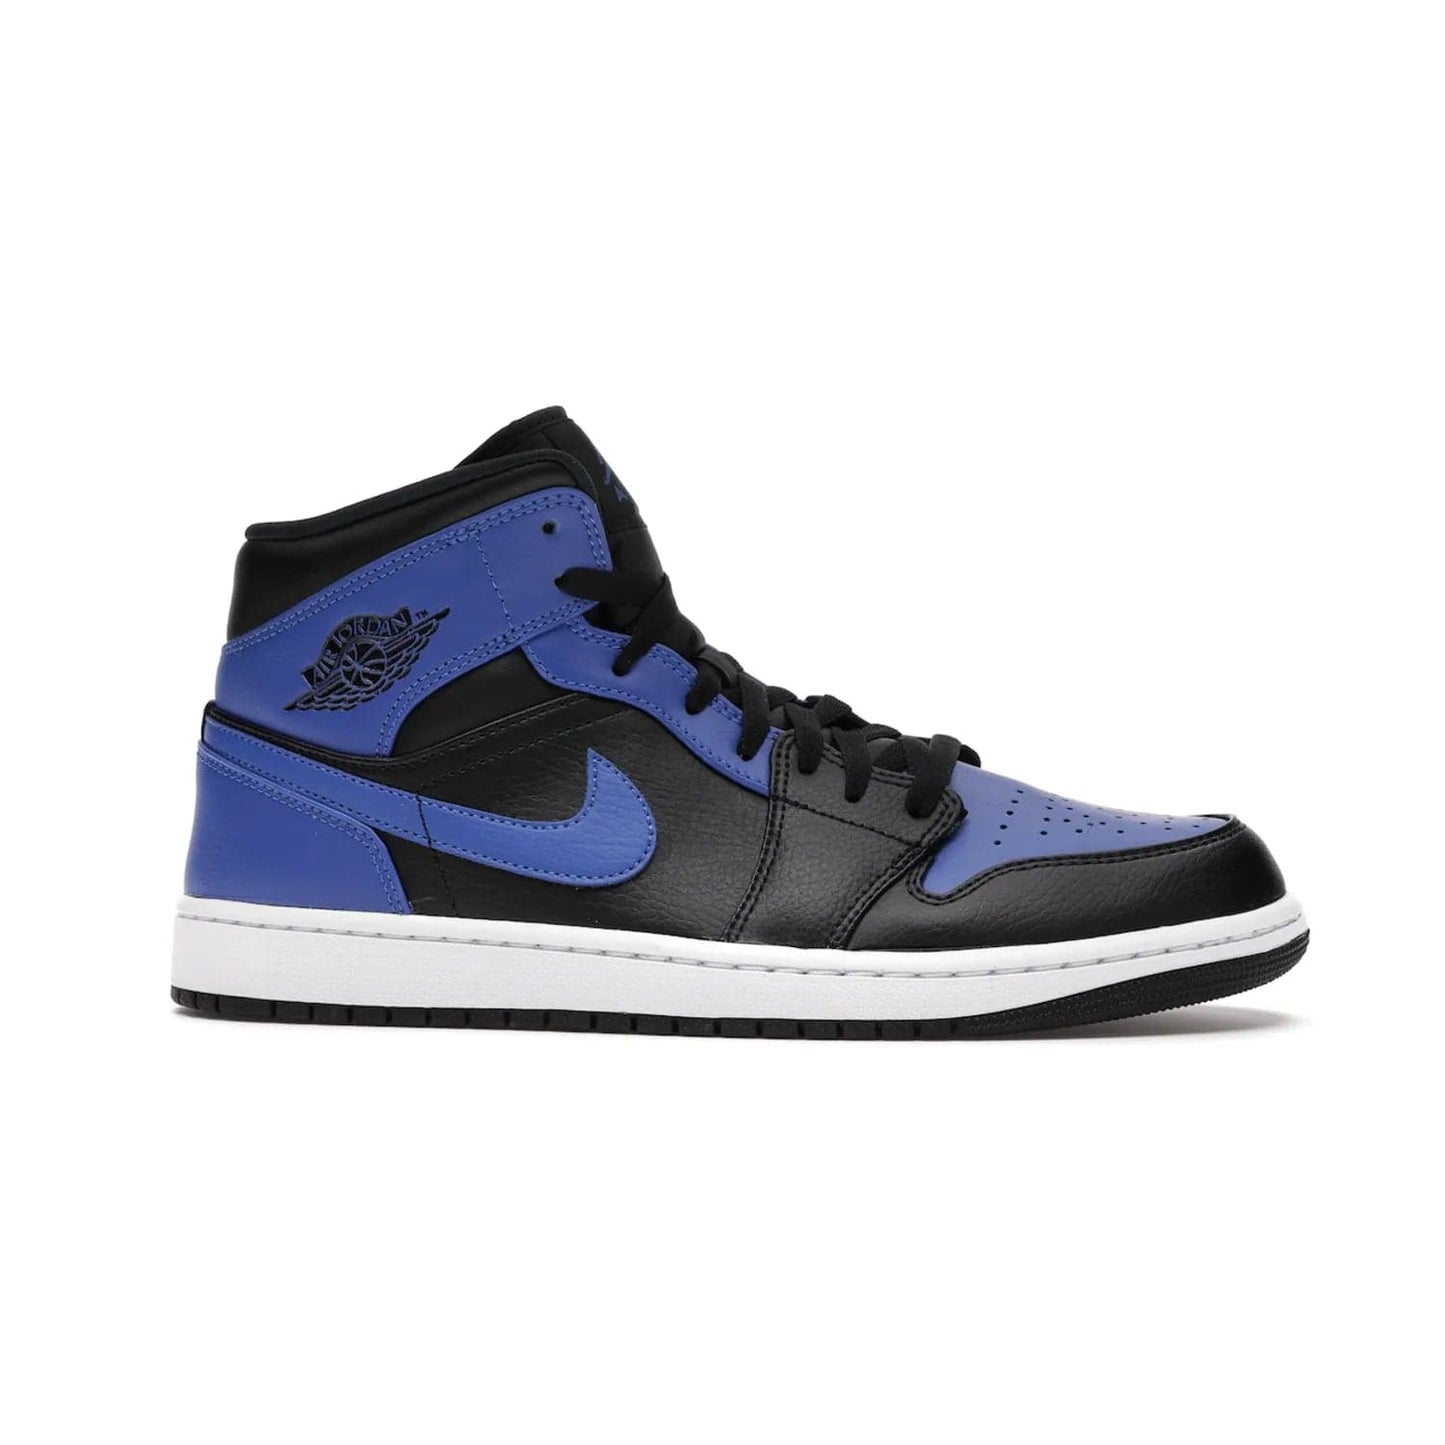 Jordan 1 Mid Hyper Royal Tumbled Leather - Image 2 - Only at www.BallersClubKickz.com - Iconic colorway of the Air Jordan 1 Mid Black Royal Tumbled Leather. Features a black tumbled leather upper, royal blue leather overlays, white midsole & black rubber outsole. Released December 2020. Adds premium style to any collection.